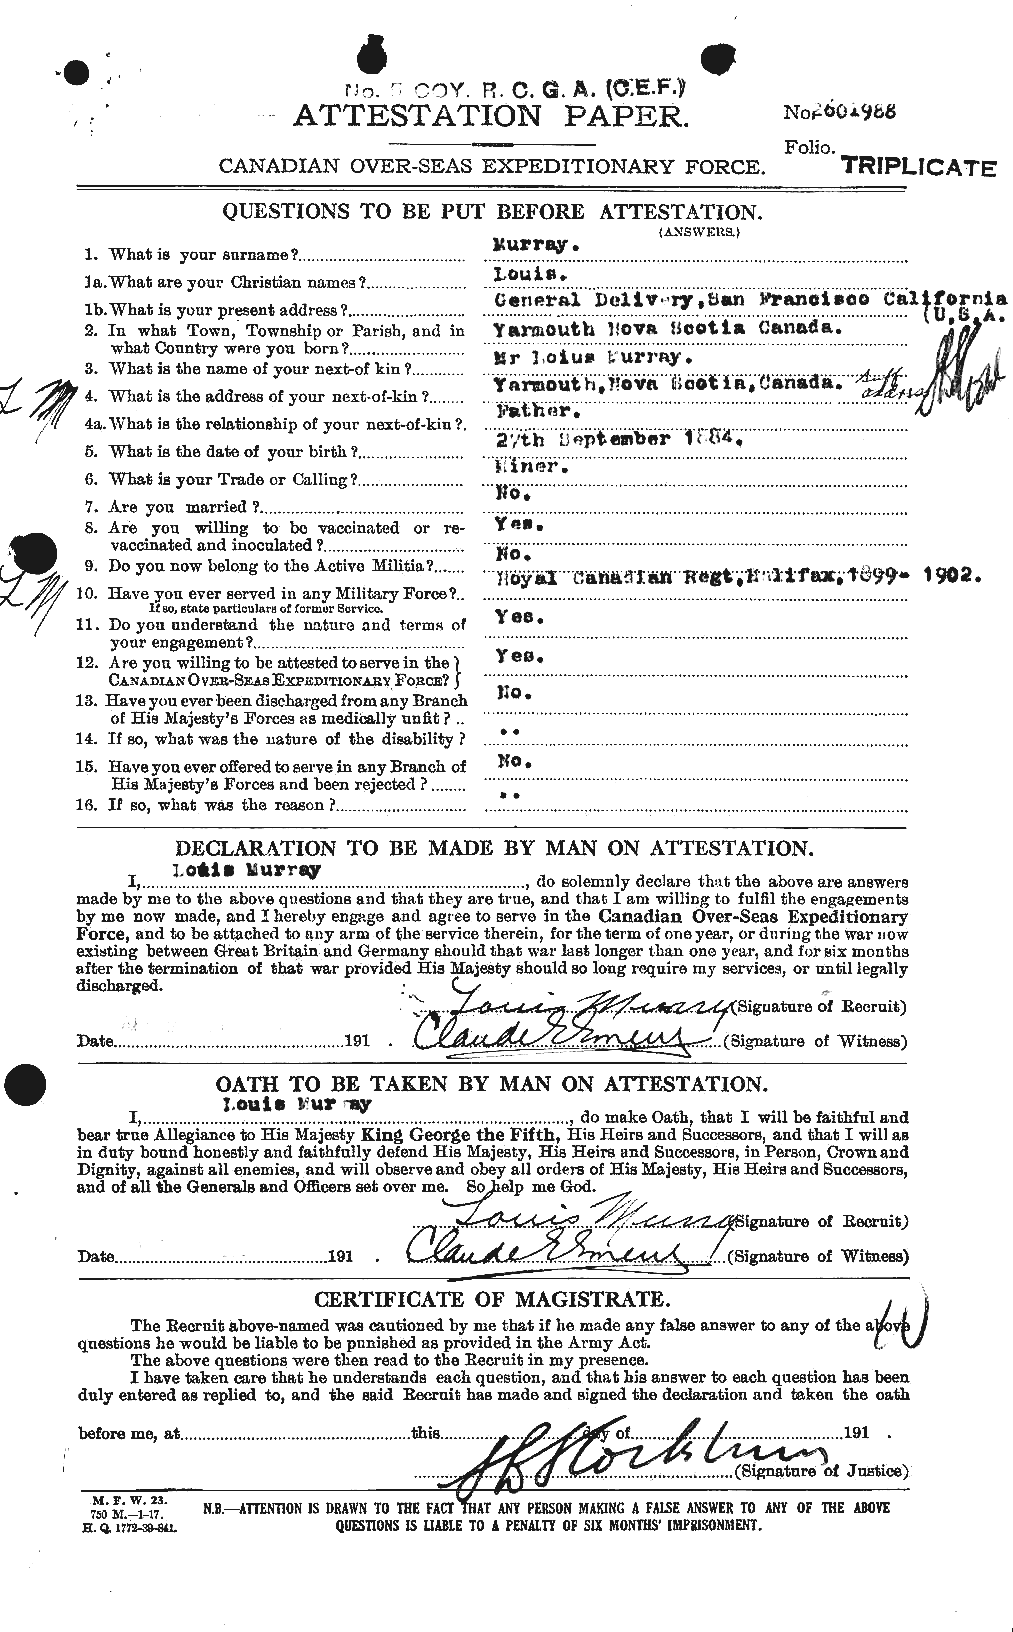 Personnel Records of the First World War - CEF 518707a